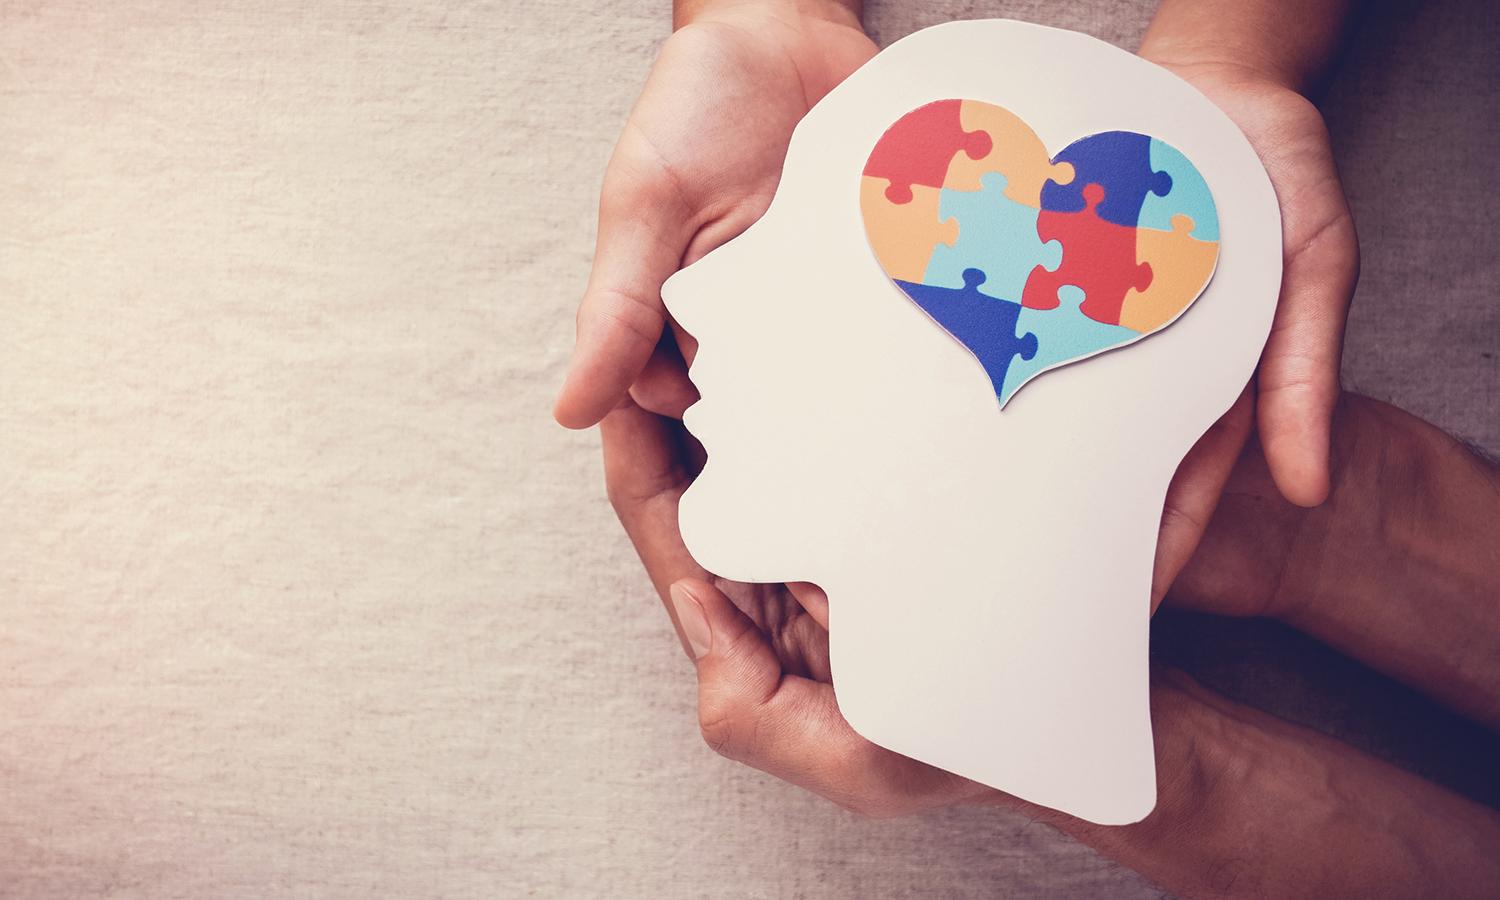 A silhouette of a person's head with a heart-shaped puzzle for a brain is held in the hands of two people.